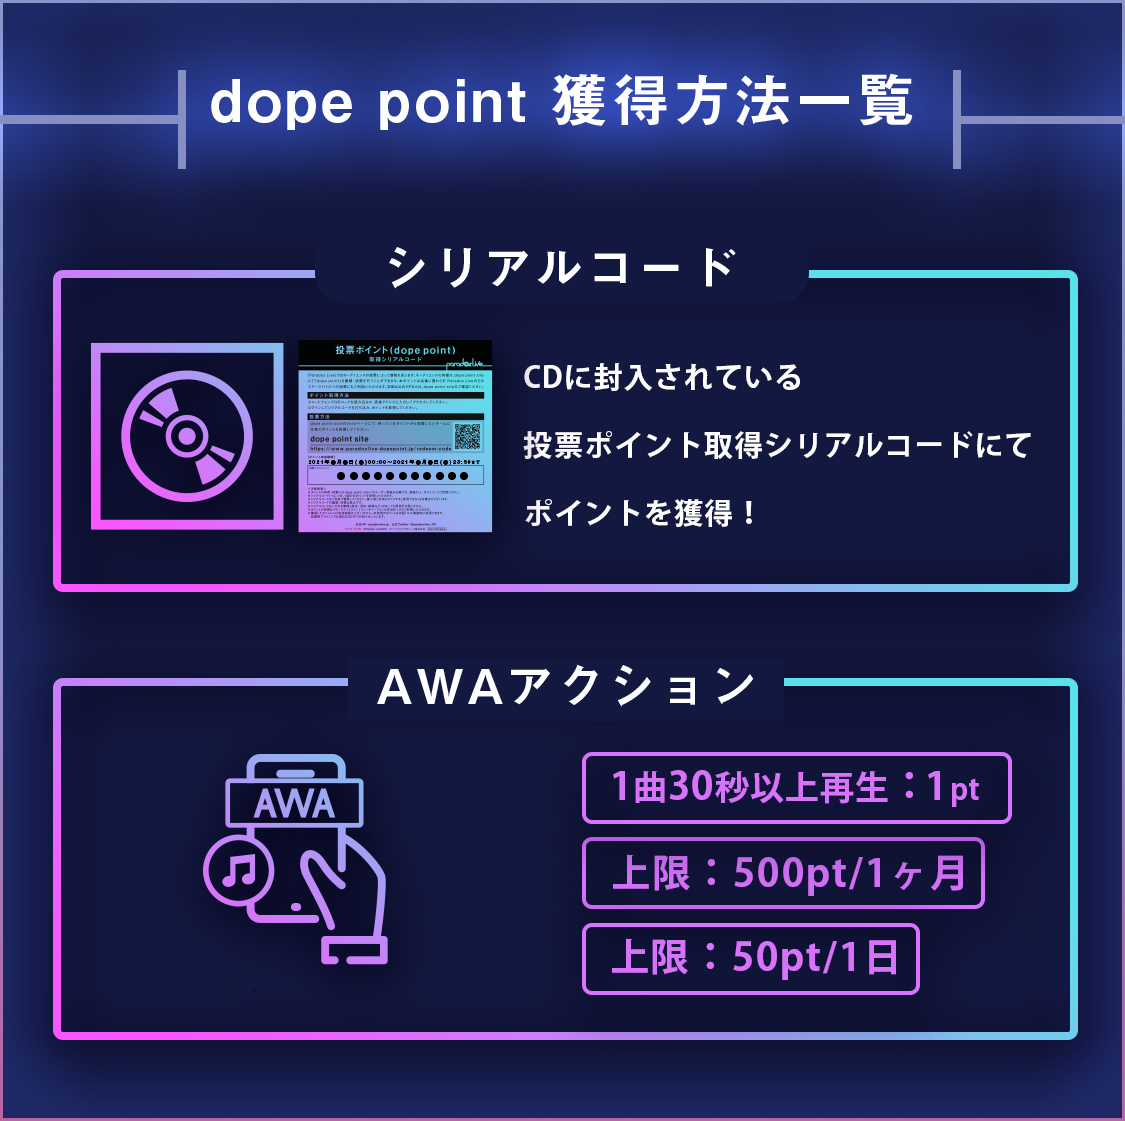 Paradox Live dope point site